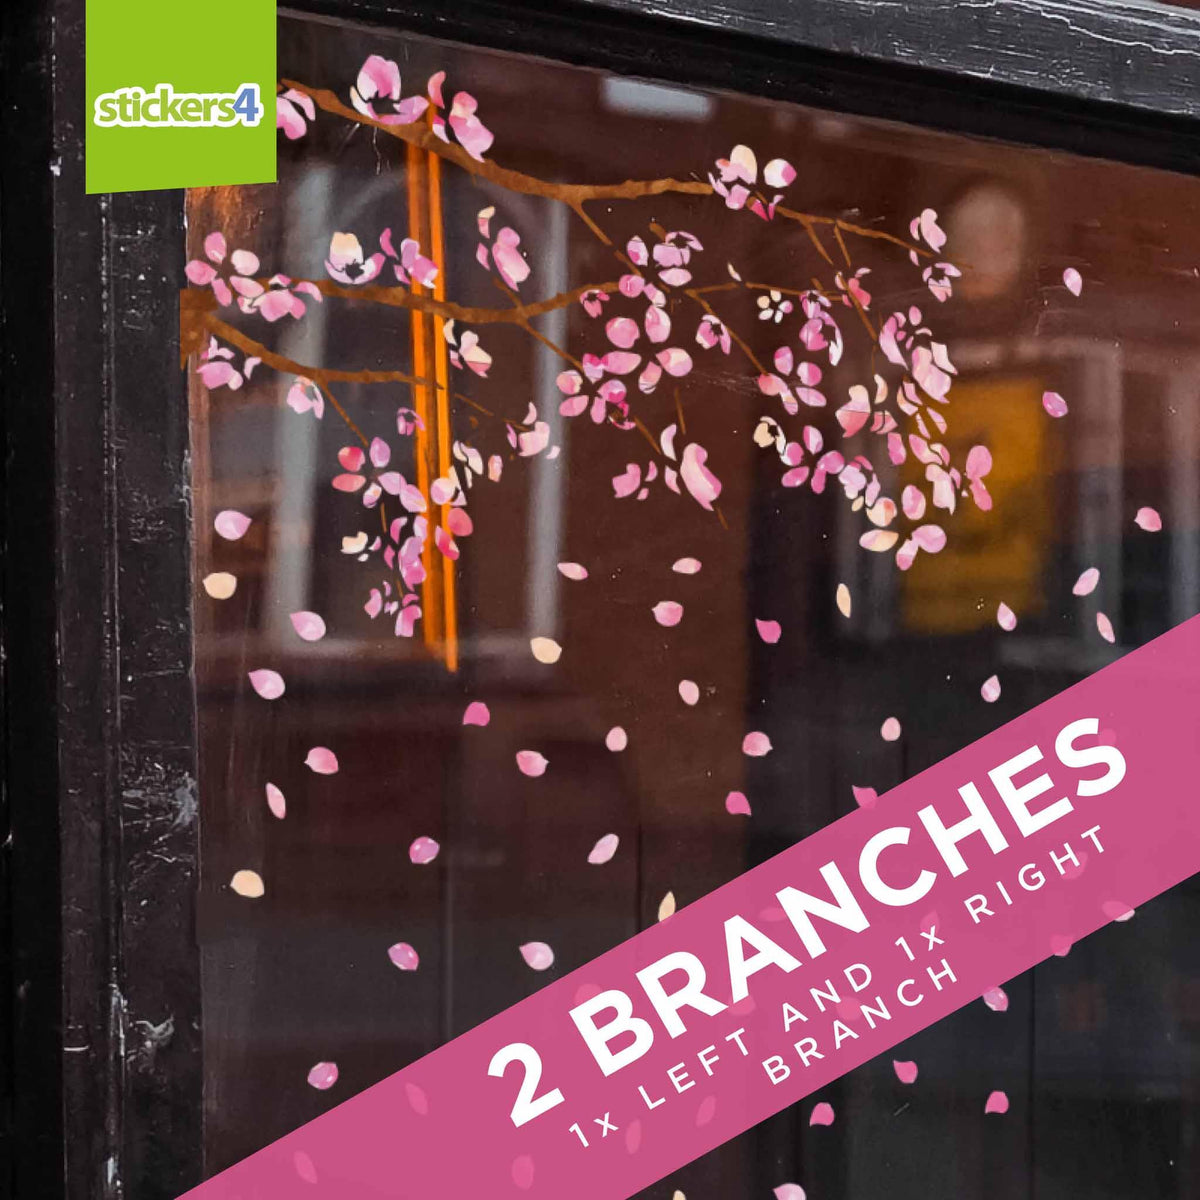 Cherry Blossom Branches Window Cling Stickers